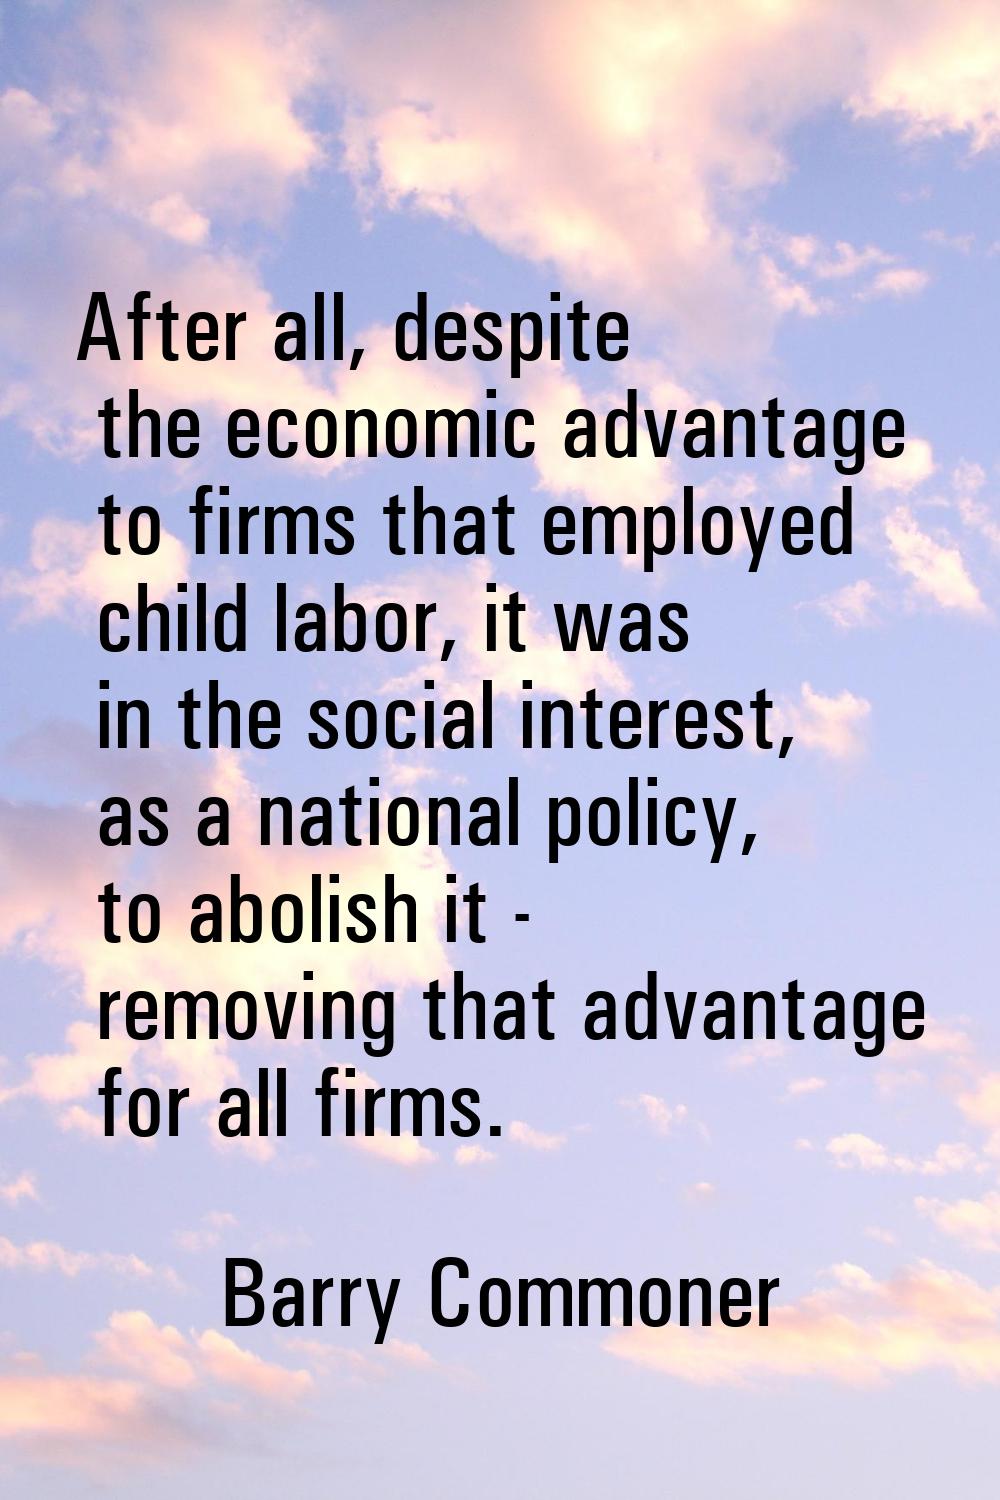 After all, despite the economic advantage to firms that employed child labor, it was in the social 